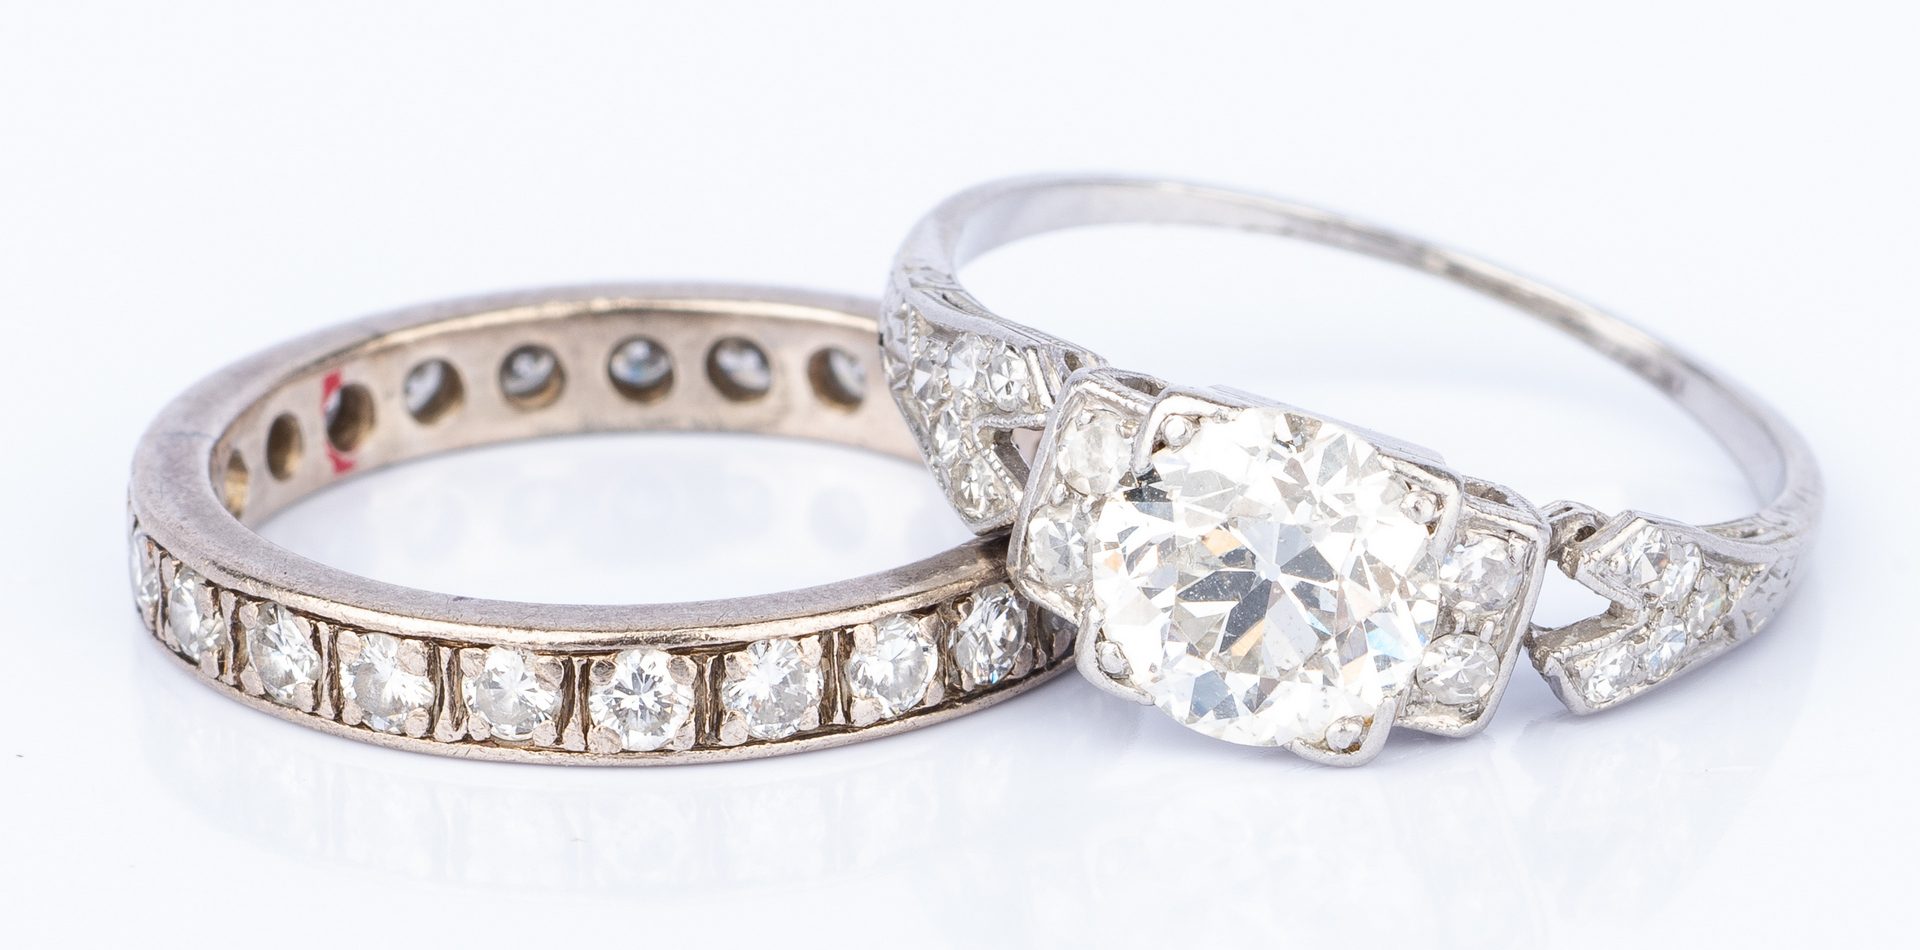 Lot 177: Diamond Ring and Eternity Band